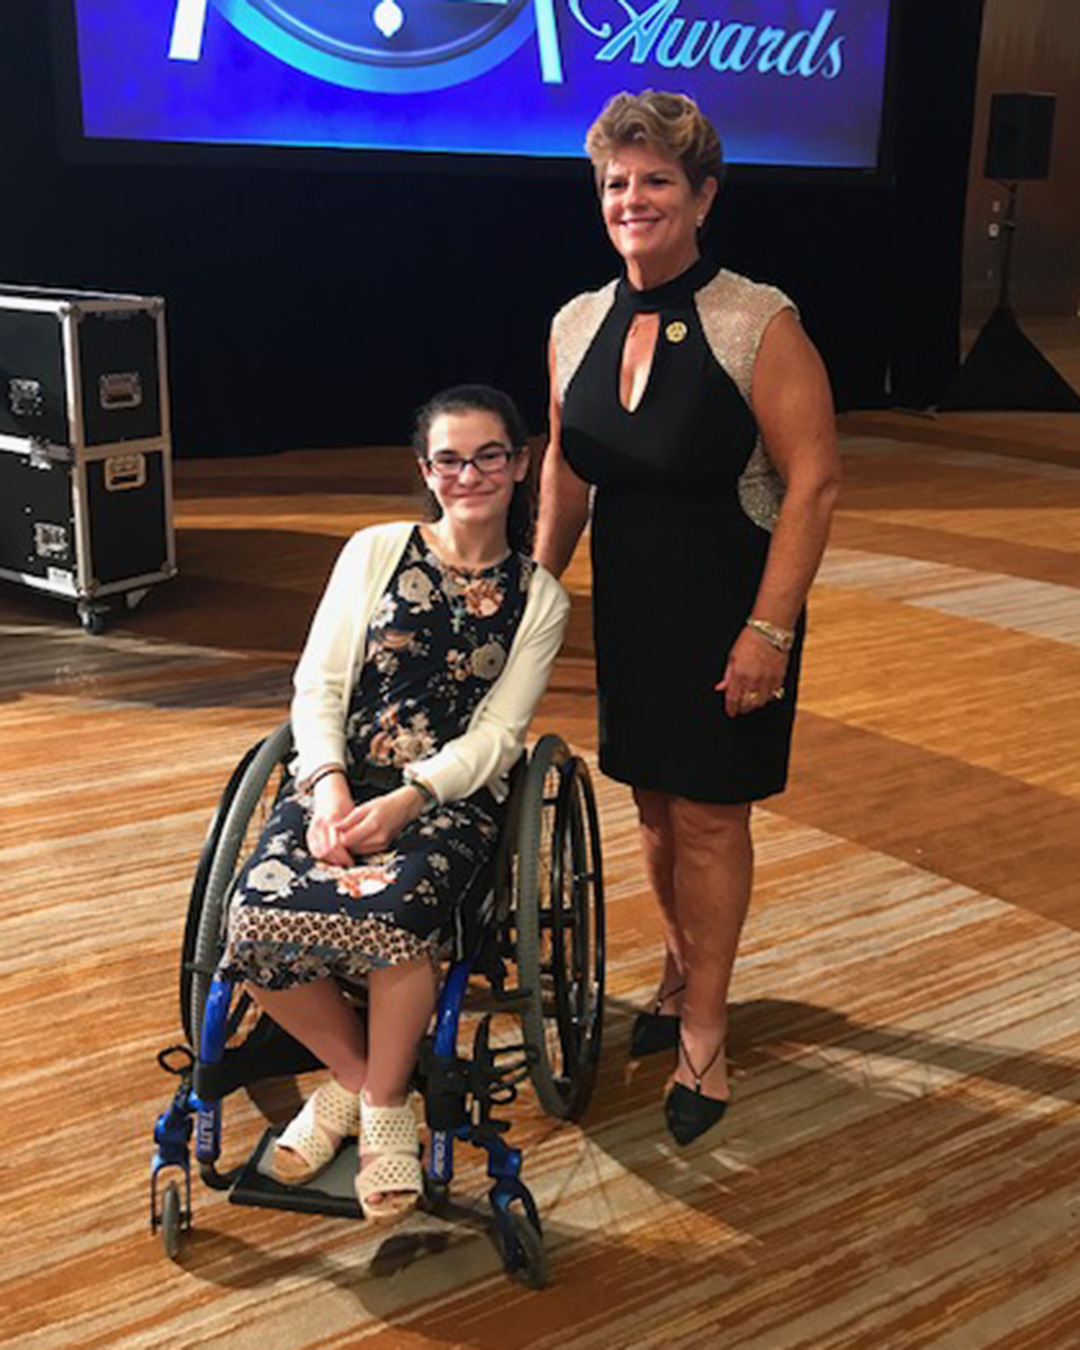 Meg Peavy poses with one of her Rising Star students at the WLKY Bell Awards in 2018.